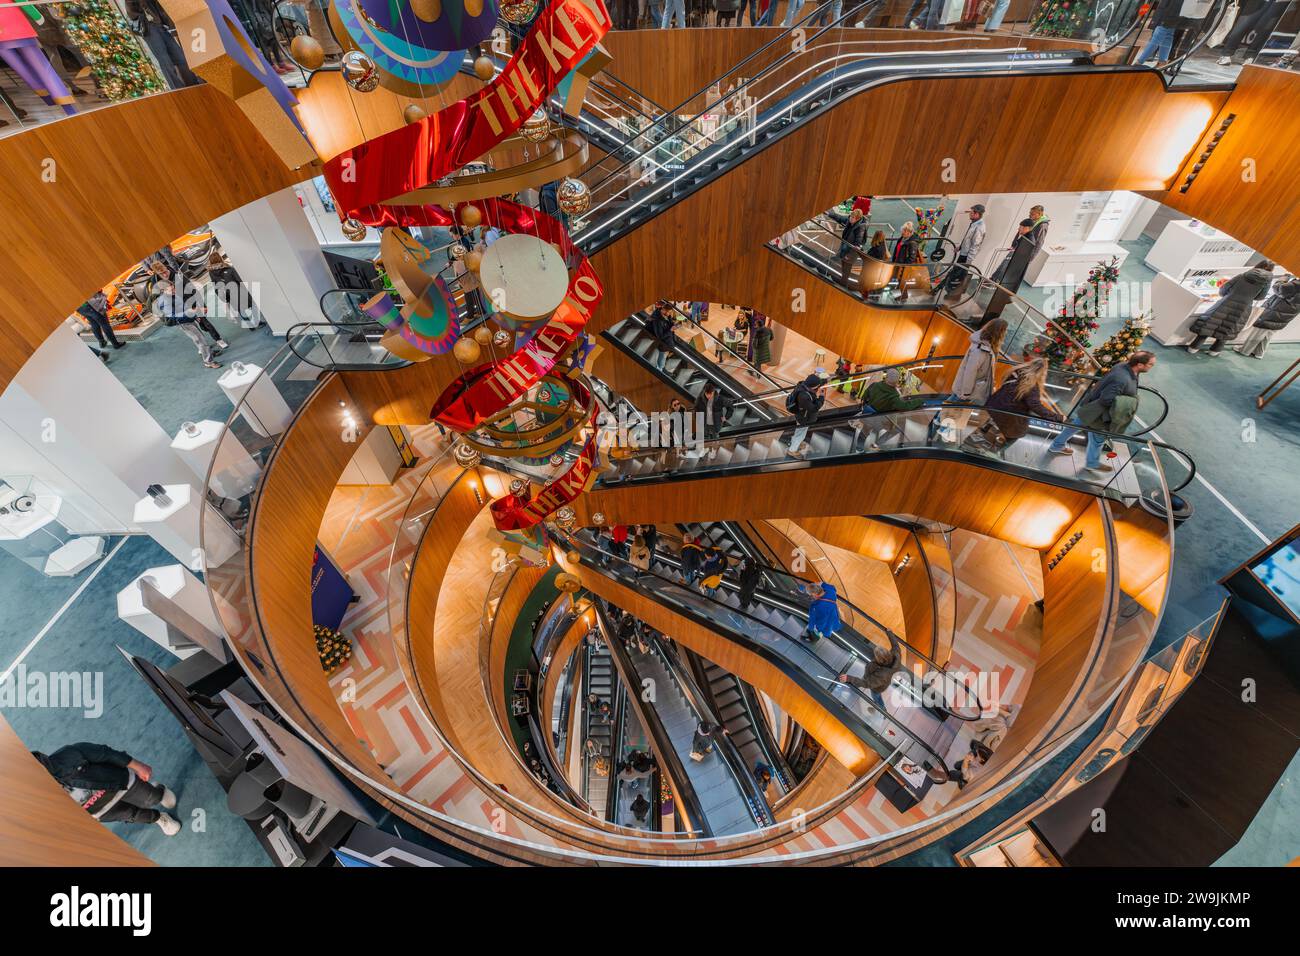 Festively decorated department stores' with several escalators and modern design, KaDeWe, Kaufhaus des Westens, Berlin, Germany Stock Photo